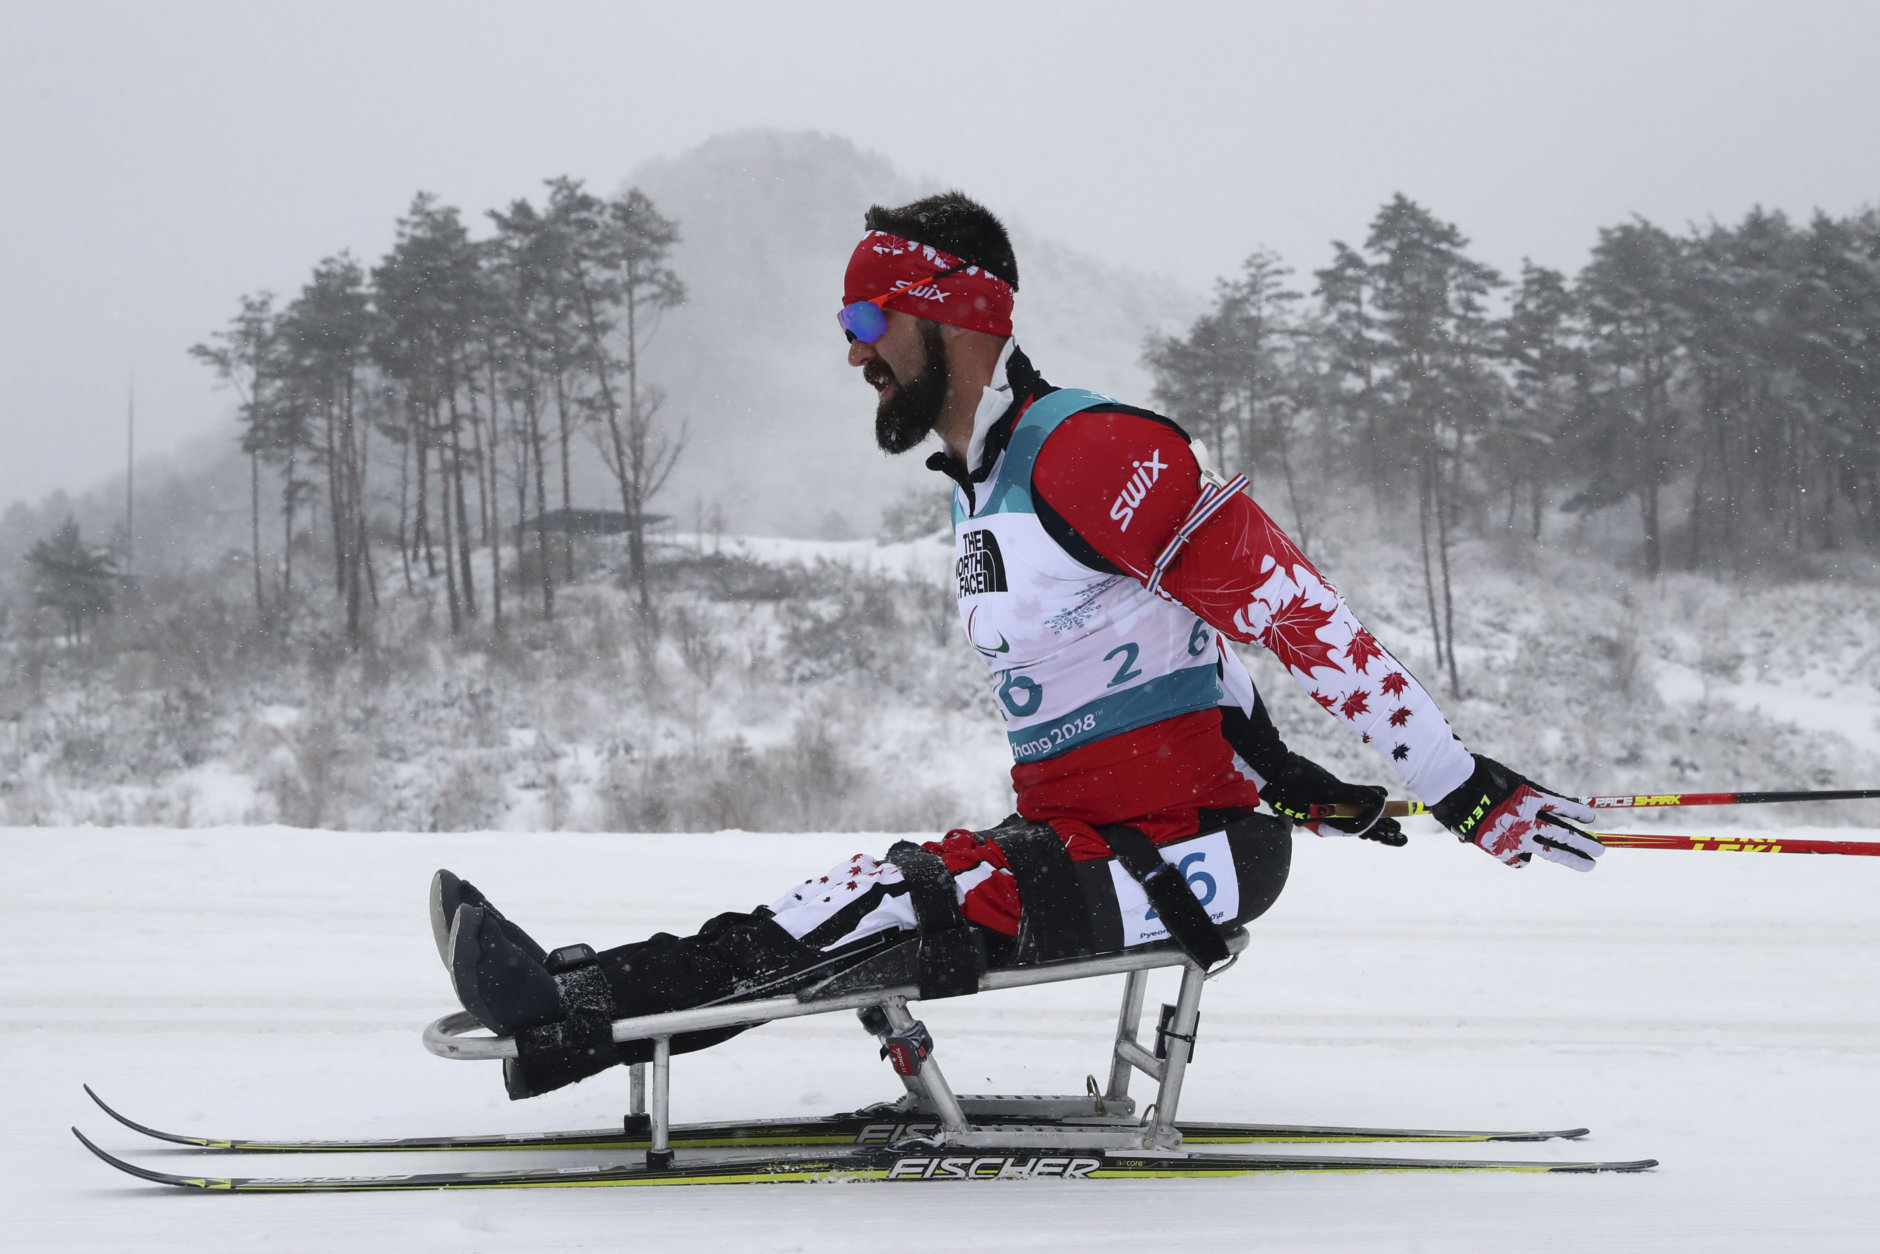 Collin Cameron of Canada competes in the Biathlon Men's 15km Sitting event during the 2018 Winter Paralympics at the Alpensia Biathlon Centre in Pyeongchang, South Korea, Friday, March 16, 2018. (AP Photo/Ng Han Guan)